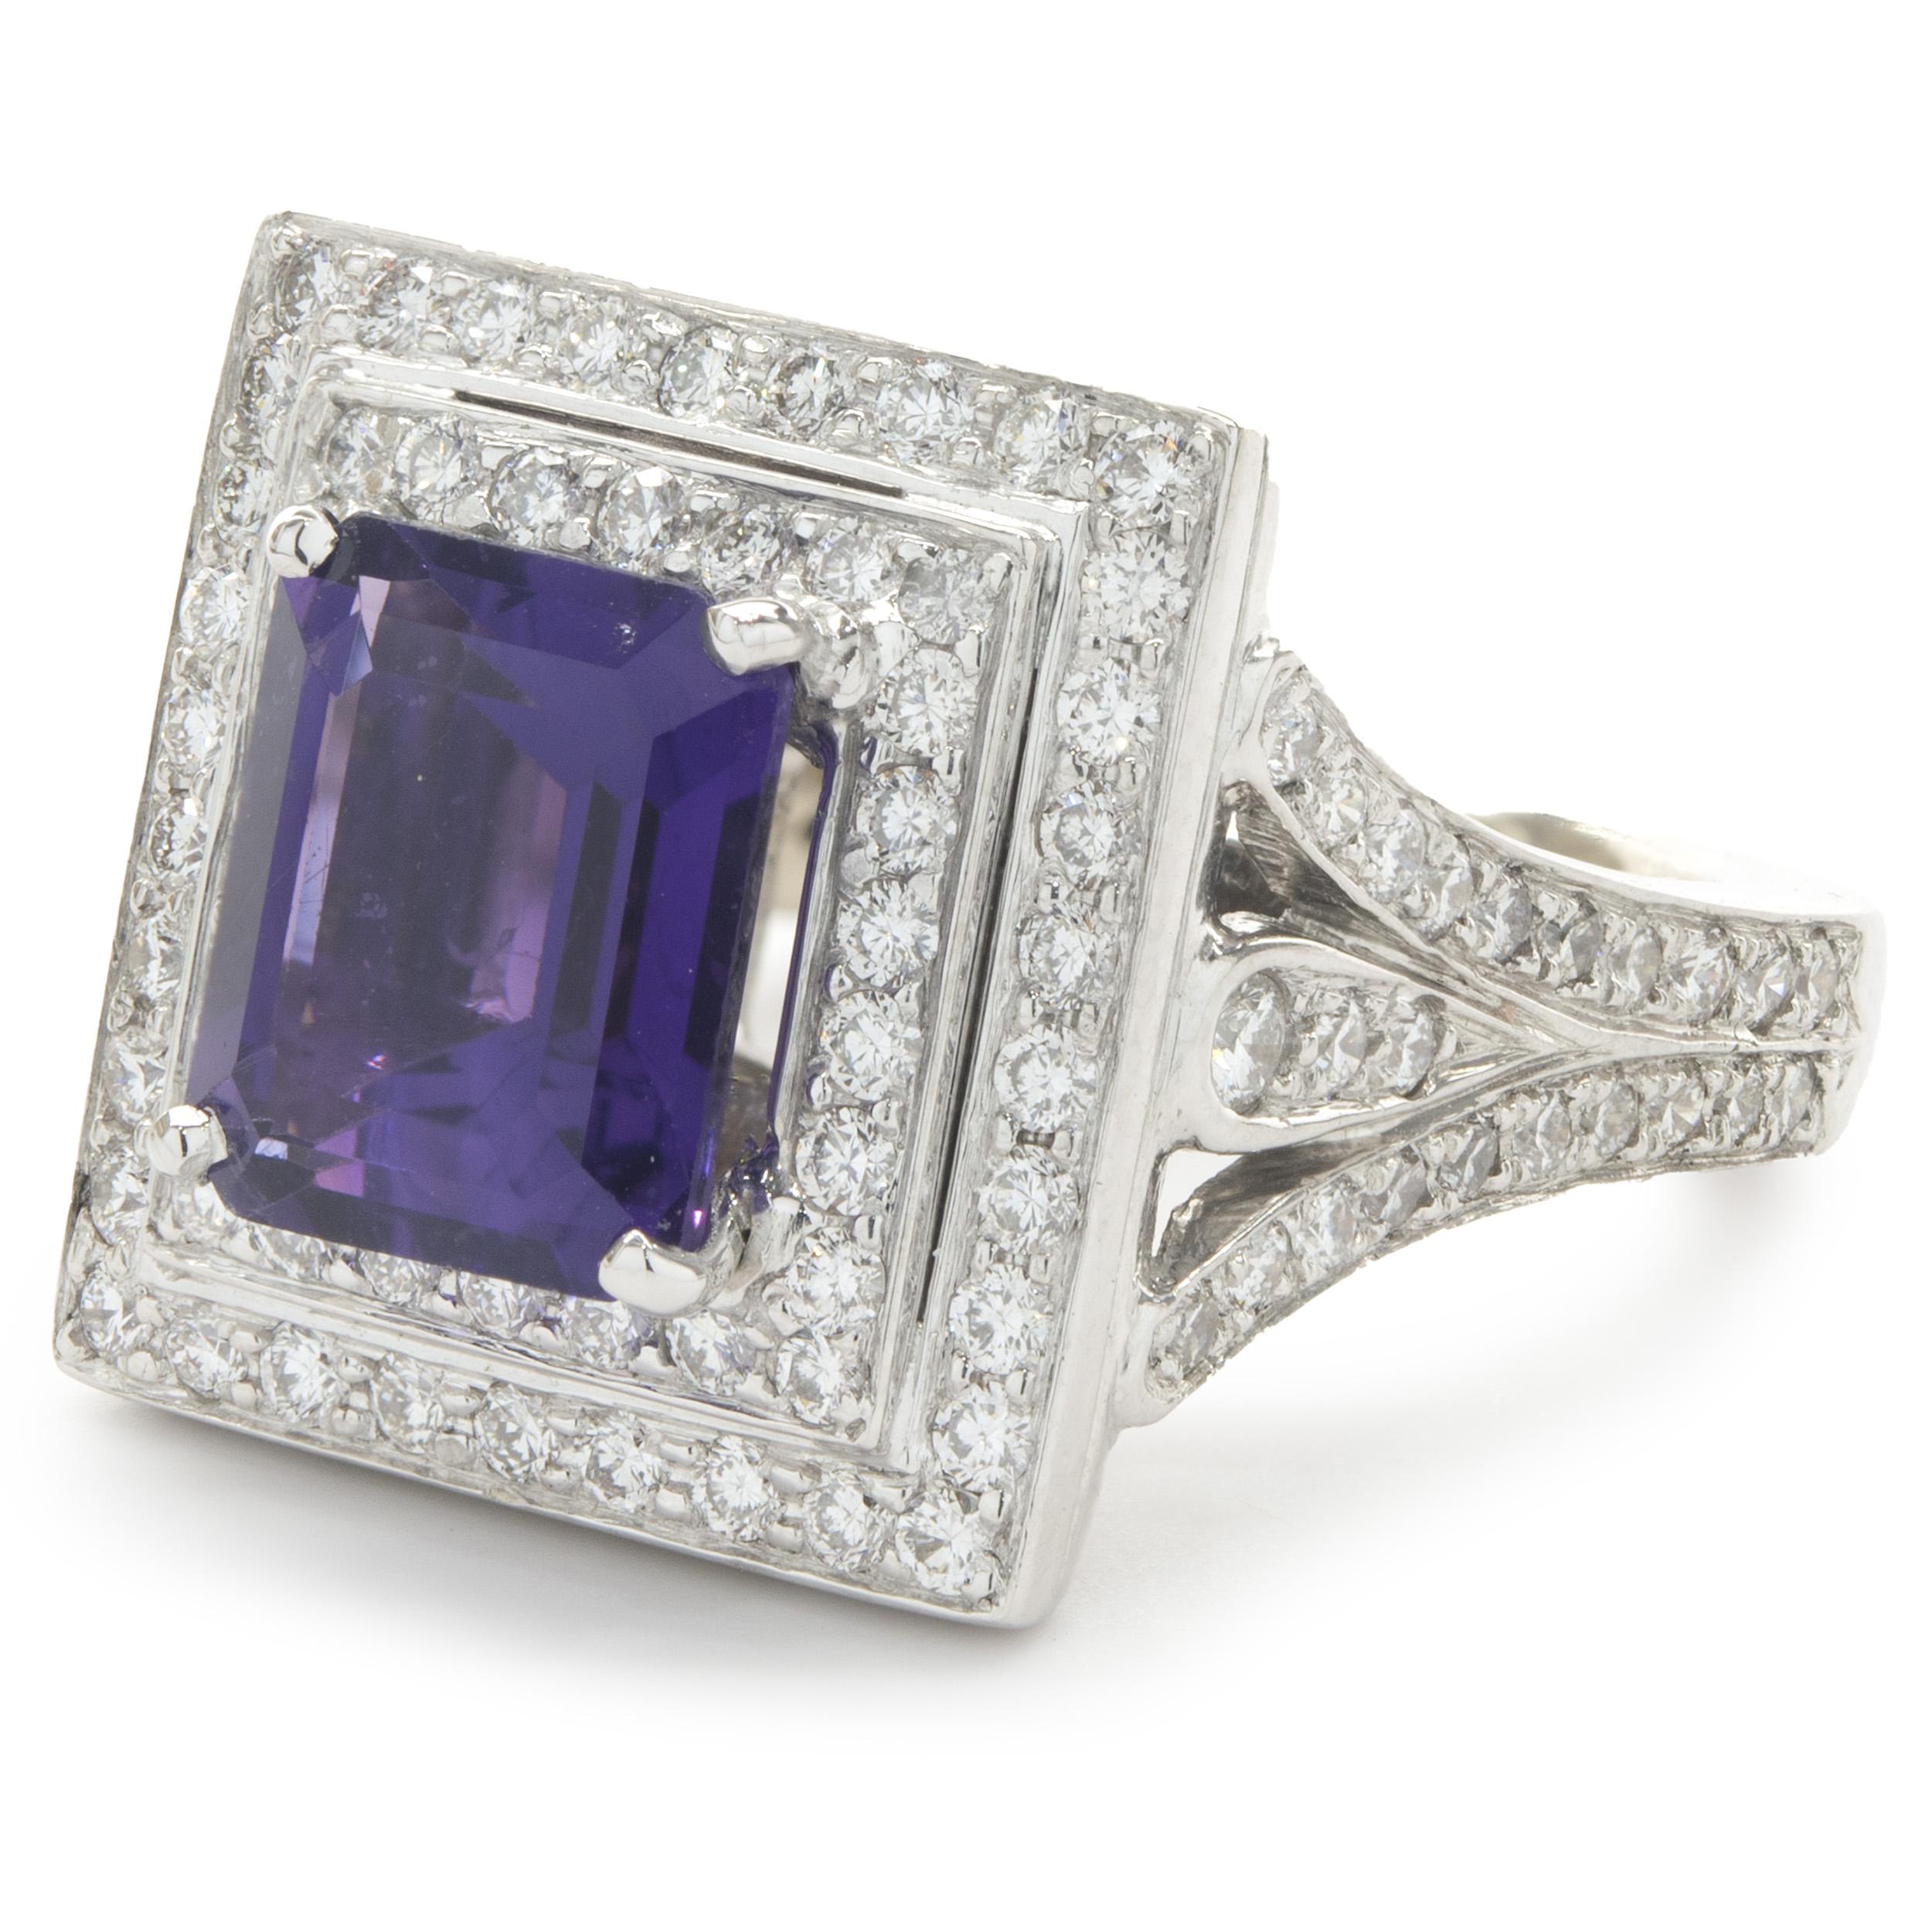 Emerald Cut 18 Karat White Gold Pave Diamond and Amethyst Cocktail Ring